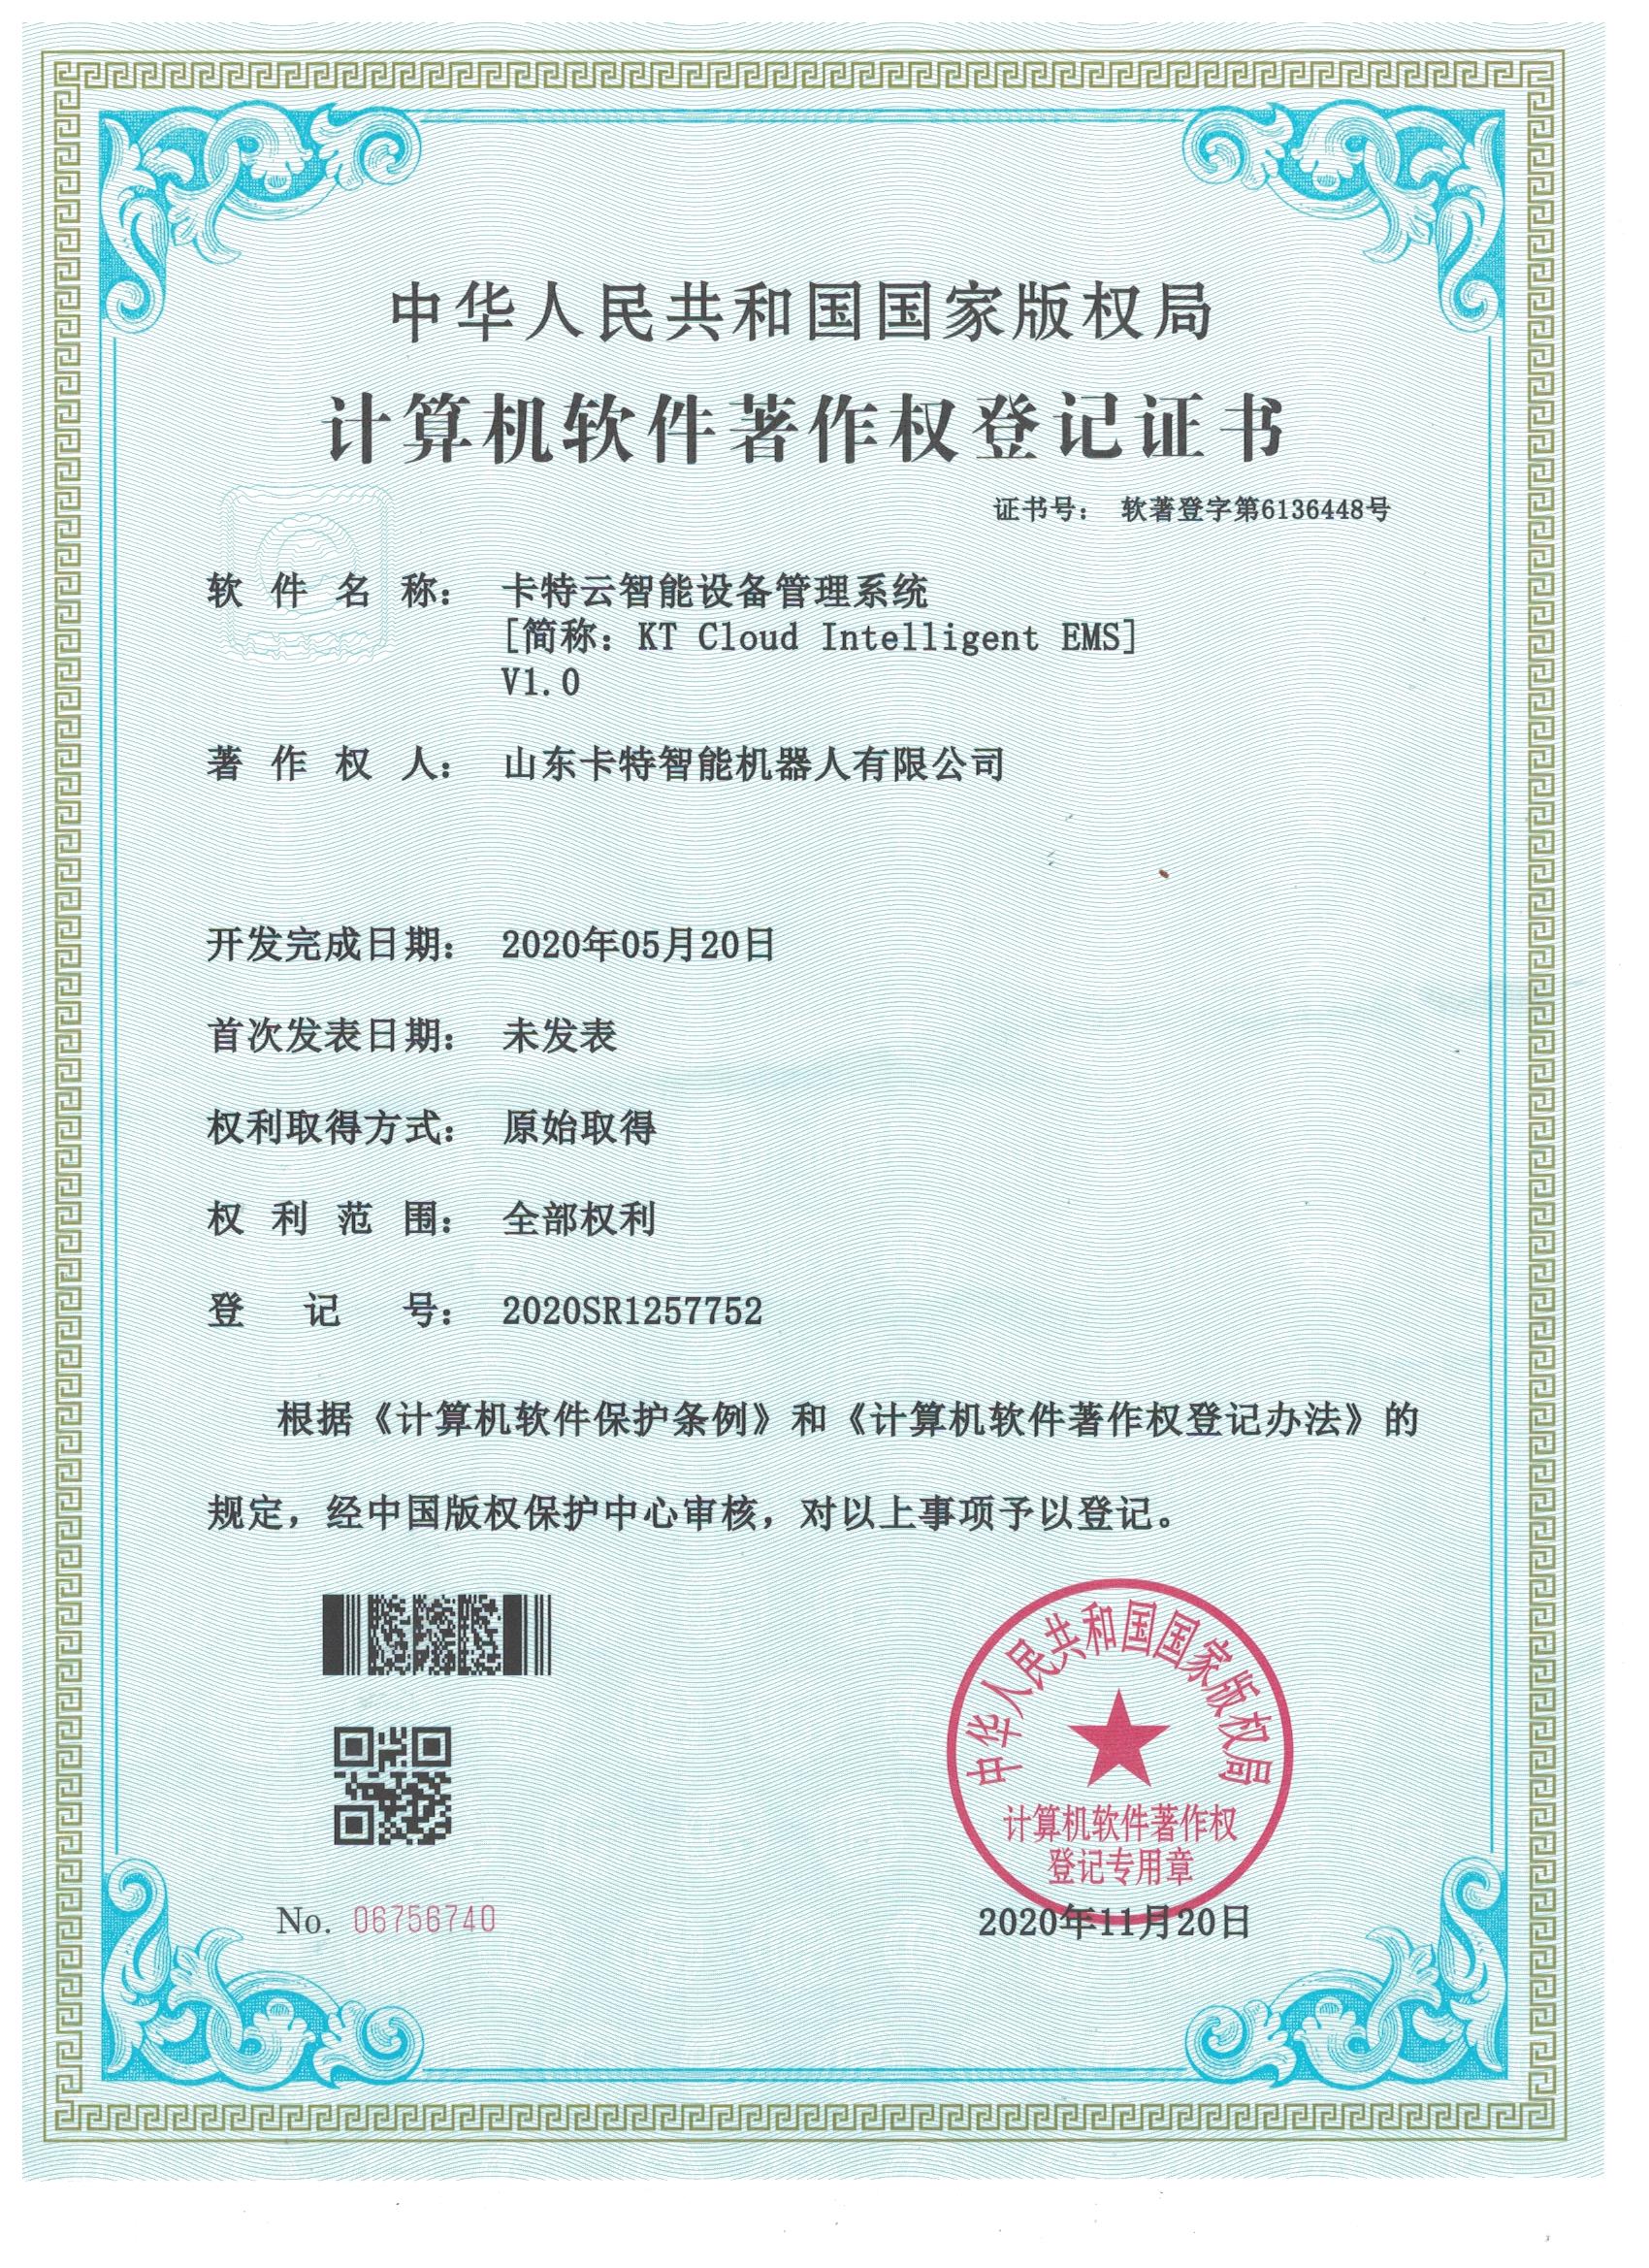 Congratulations To The Kate Intelligent Robot Company Under China Coal Group For Adding A National Computer Software Copyright Certificate